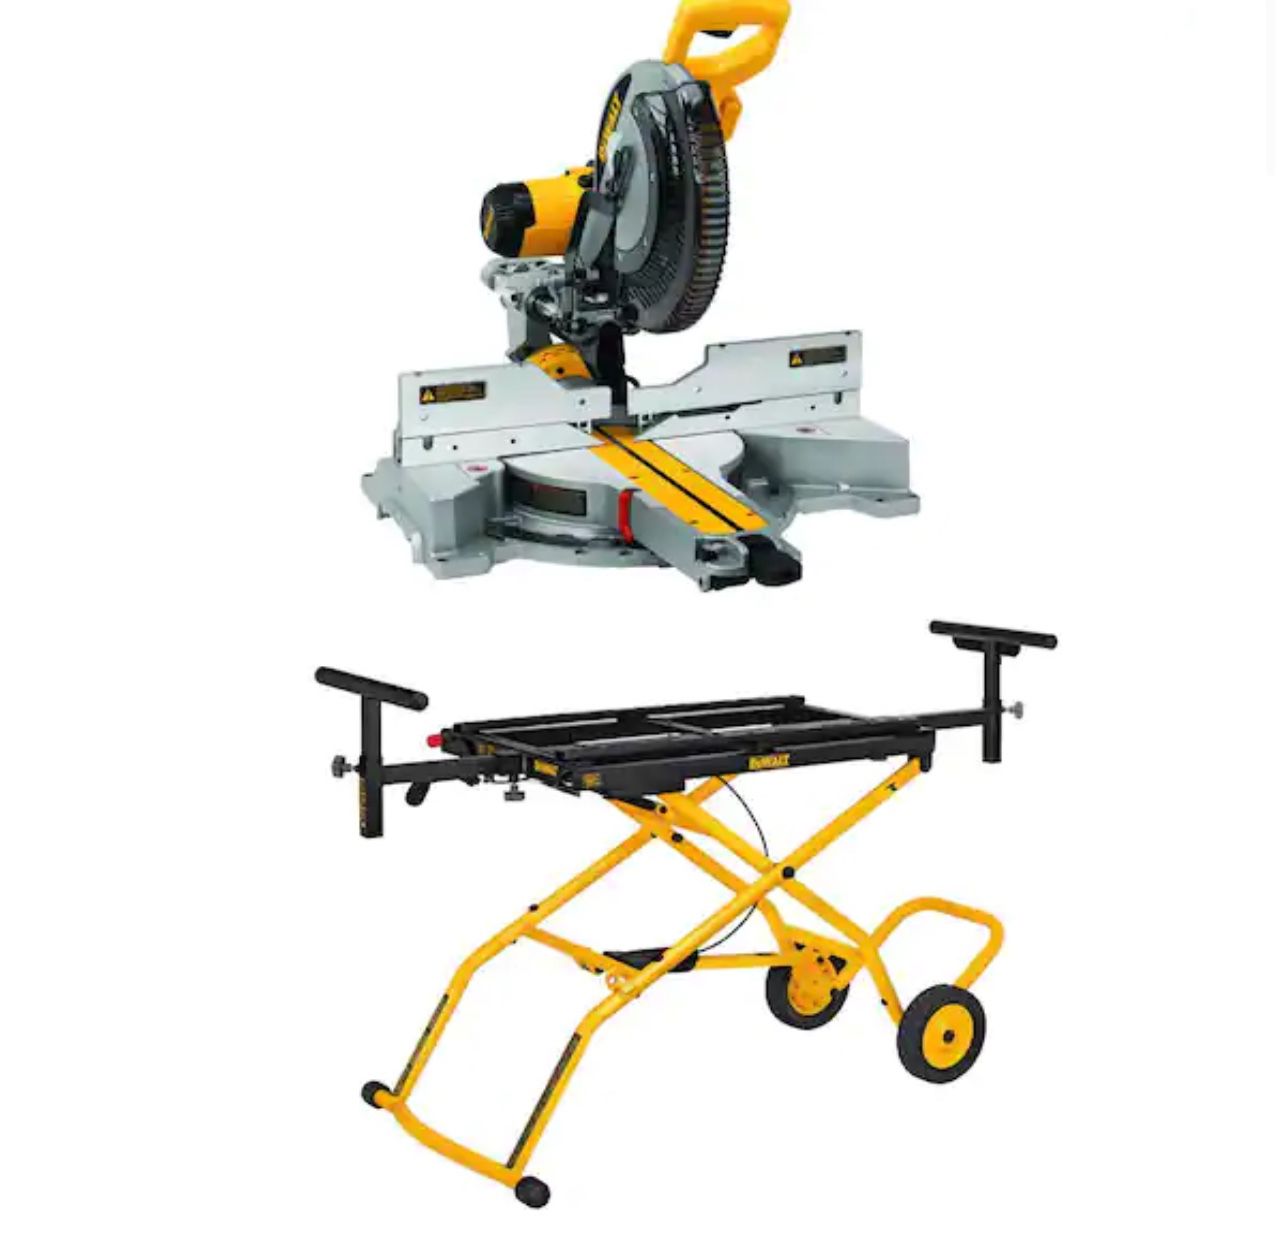 DEWALT 15 Amp Corded 12 in. Double Bevel Sliding Compound Miter Saw and 32-1/2 in. x 60 in. Rolling Miter Saw Stand